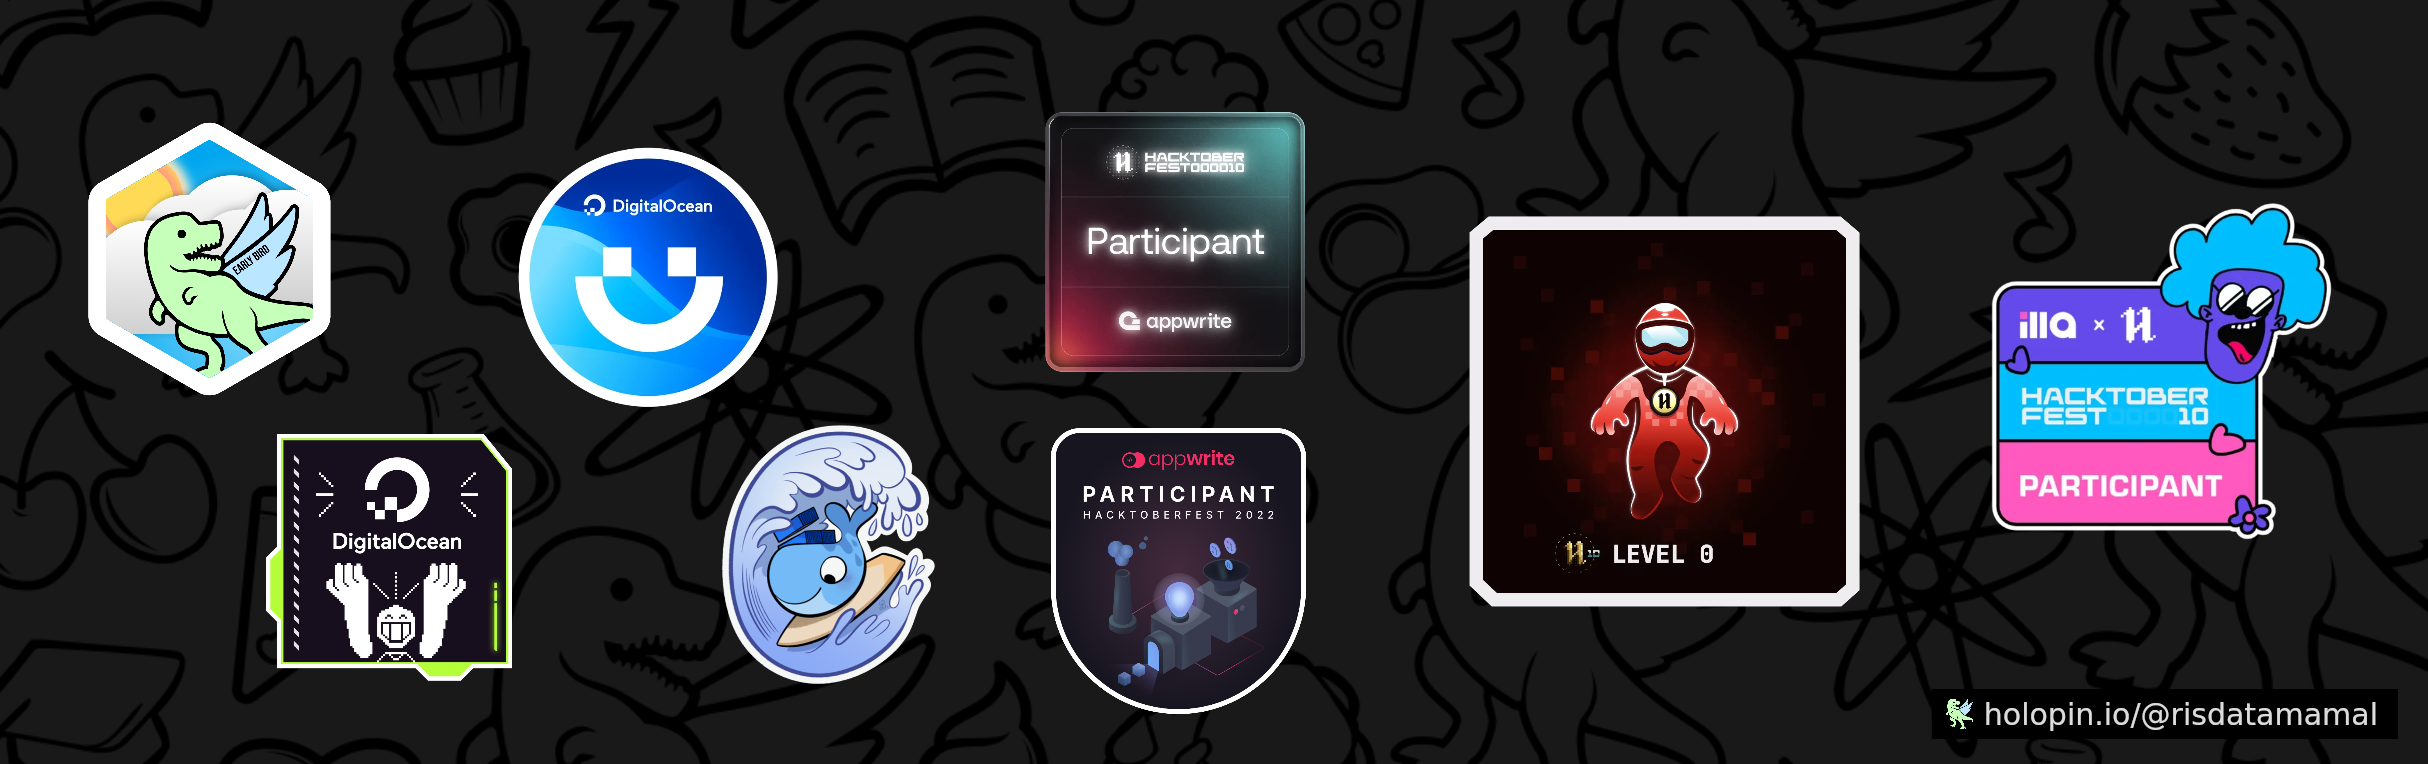 An image of @risdatamamal's Holopin badges, which is a link to view their full Holopin profile